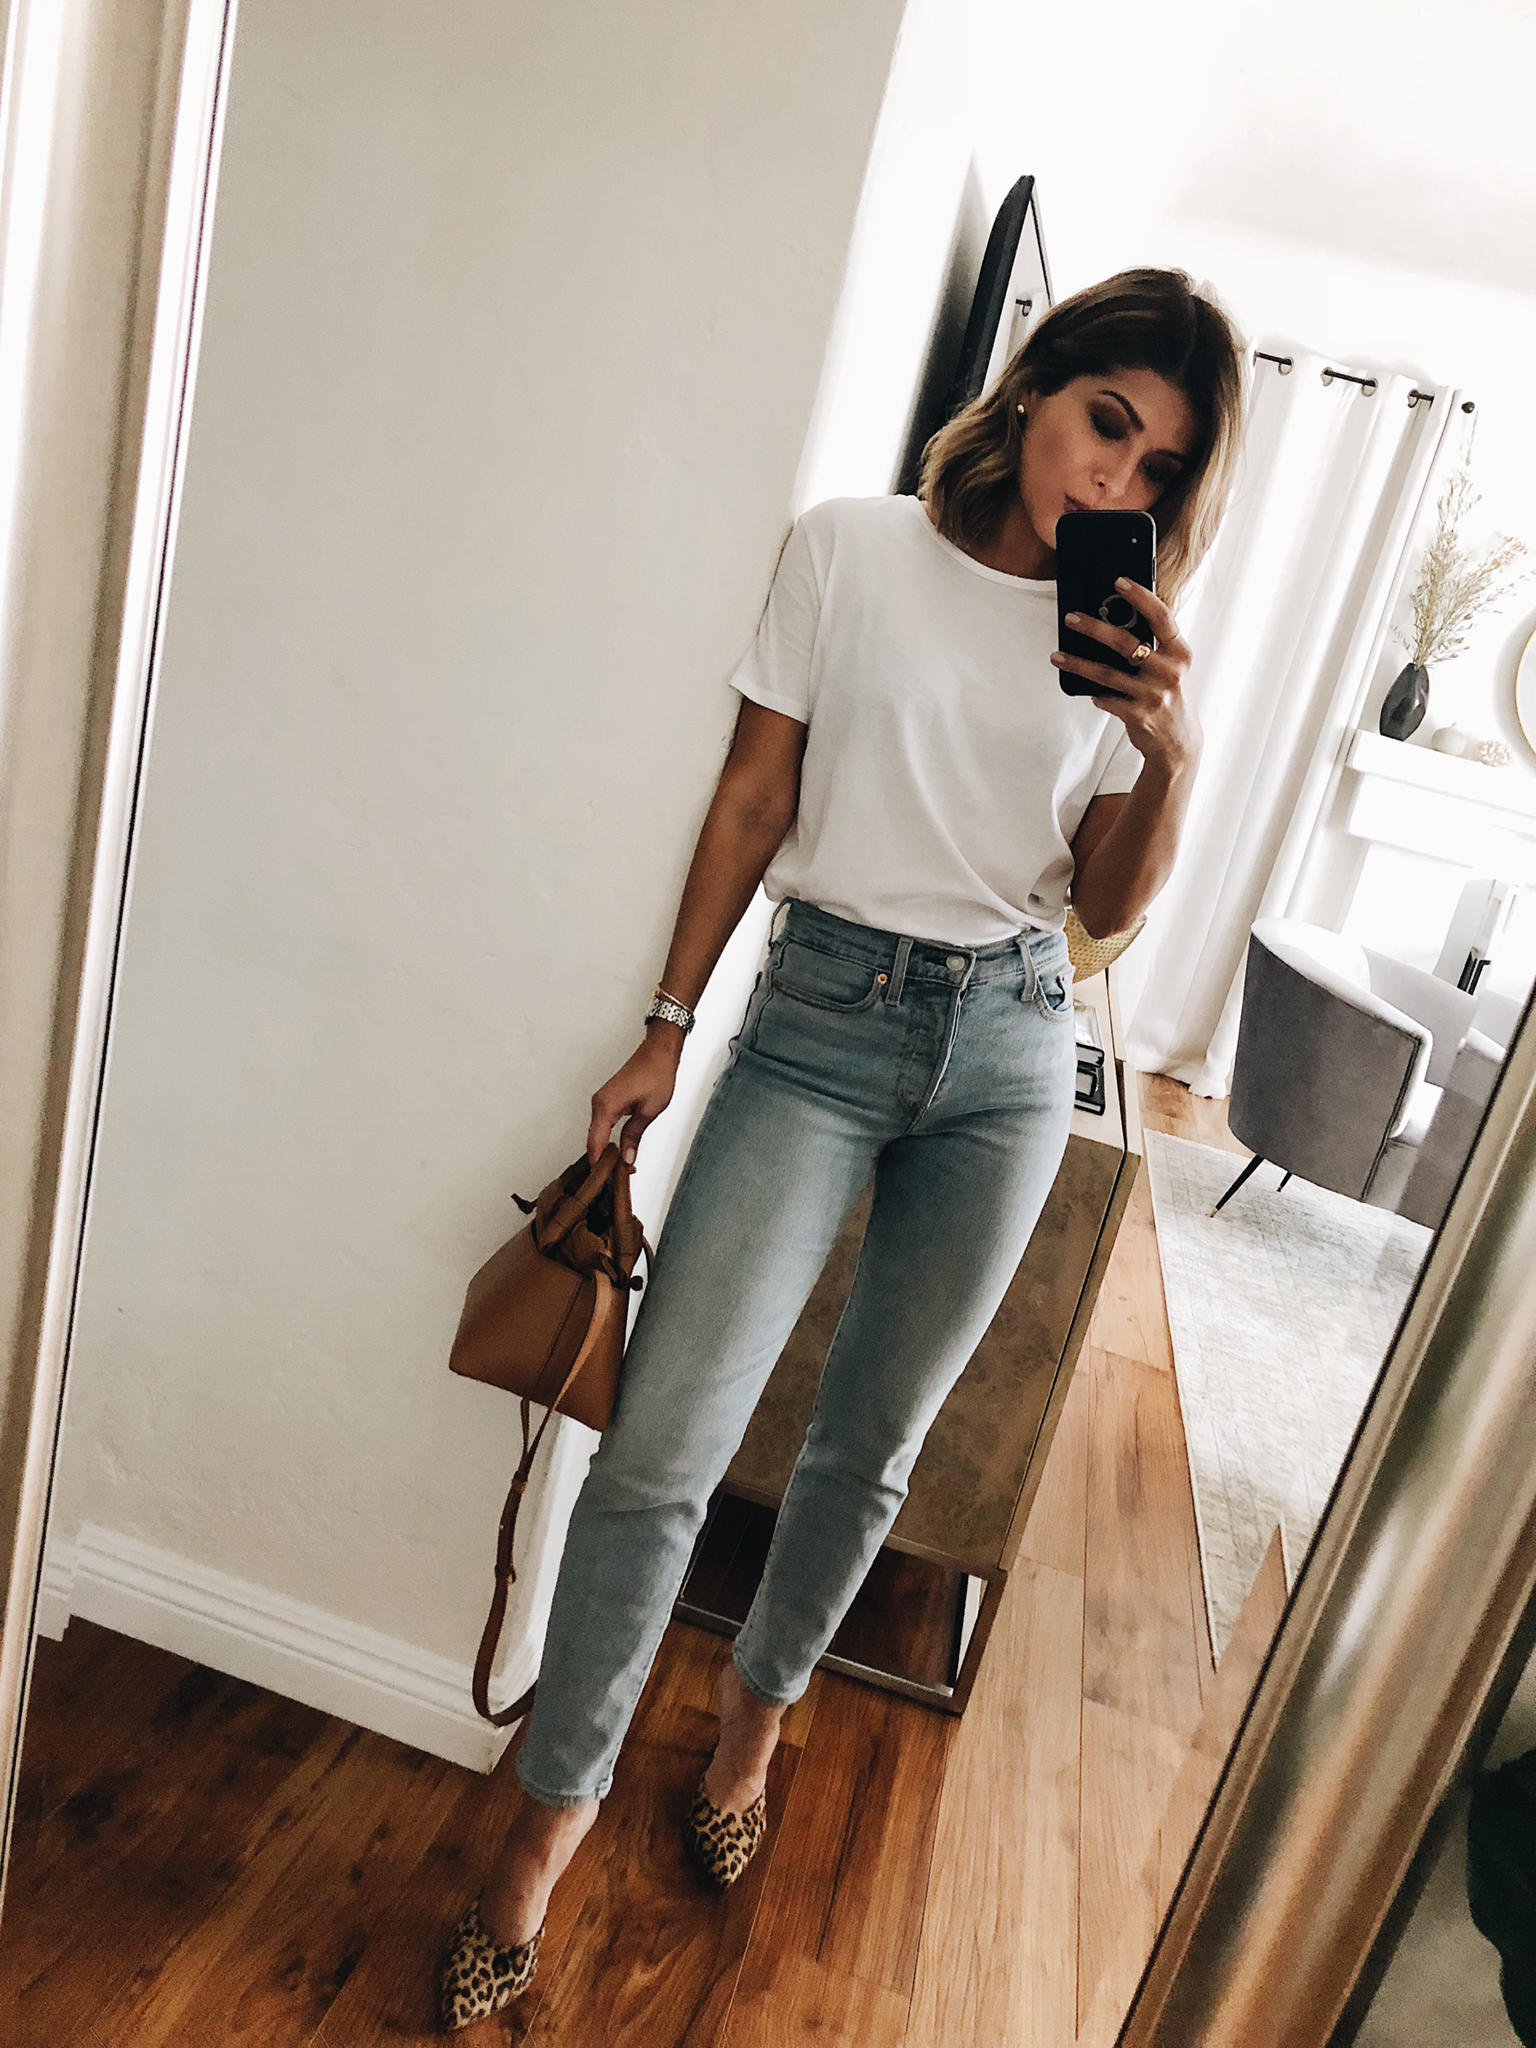 My Favorite T-Shirt Brands for Every Budget by Pam Hetlinger | TheGirlFromPanama.com | Levi's jeans, & Other Stories T-shirt, leopard print mules, simple chic outfit, chic minimalist outfit